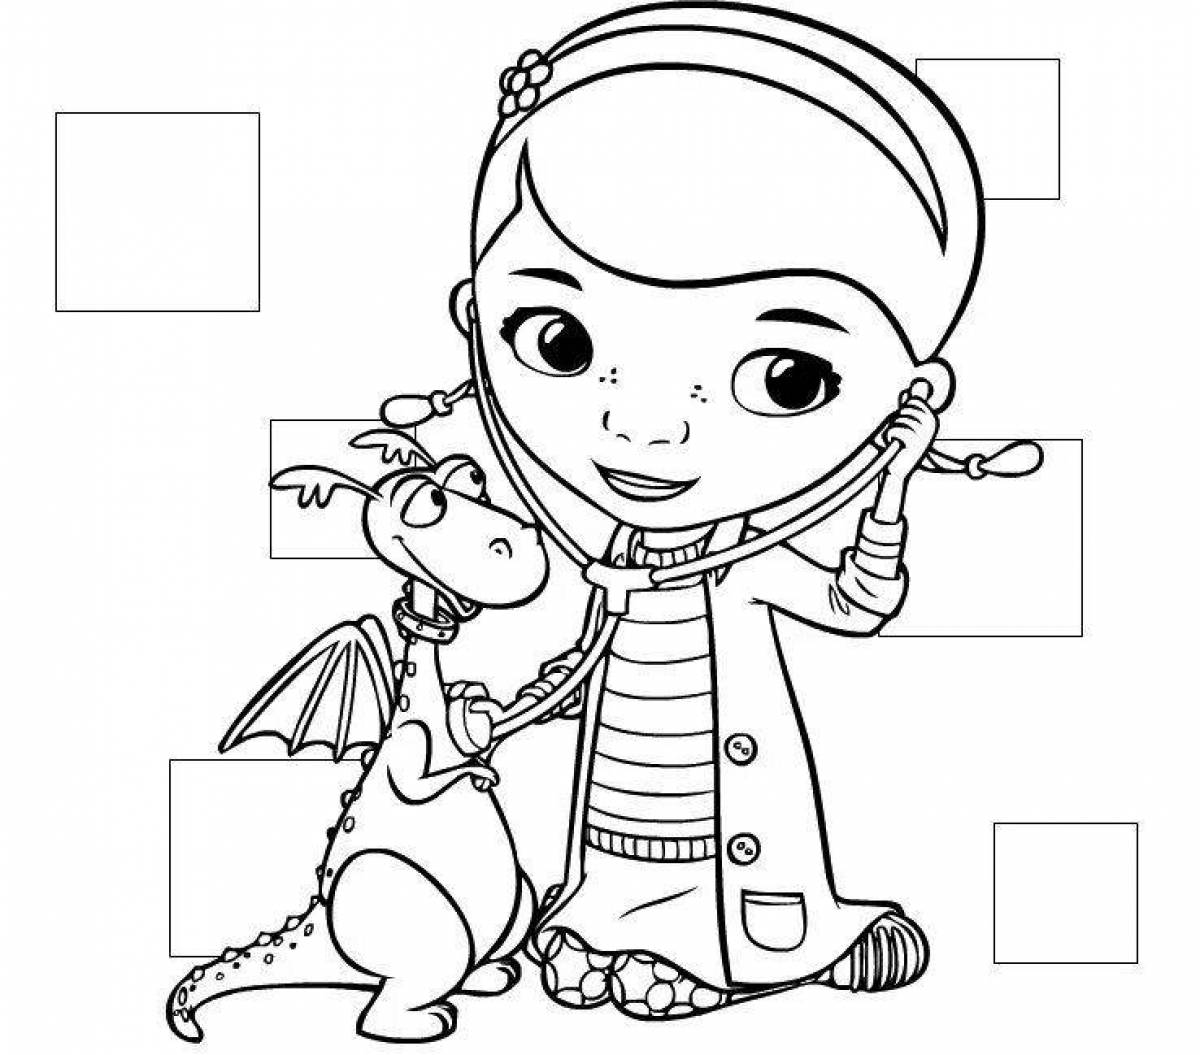 Amazing coloring page from March